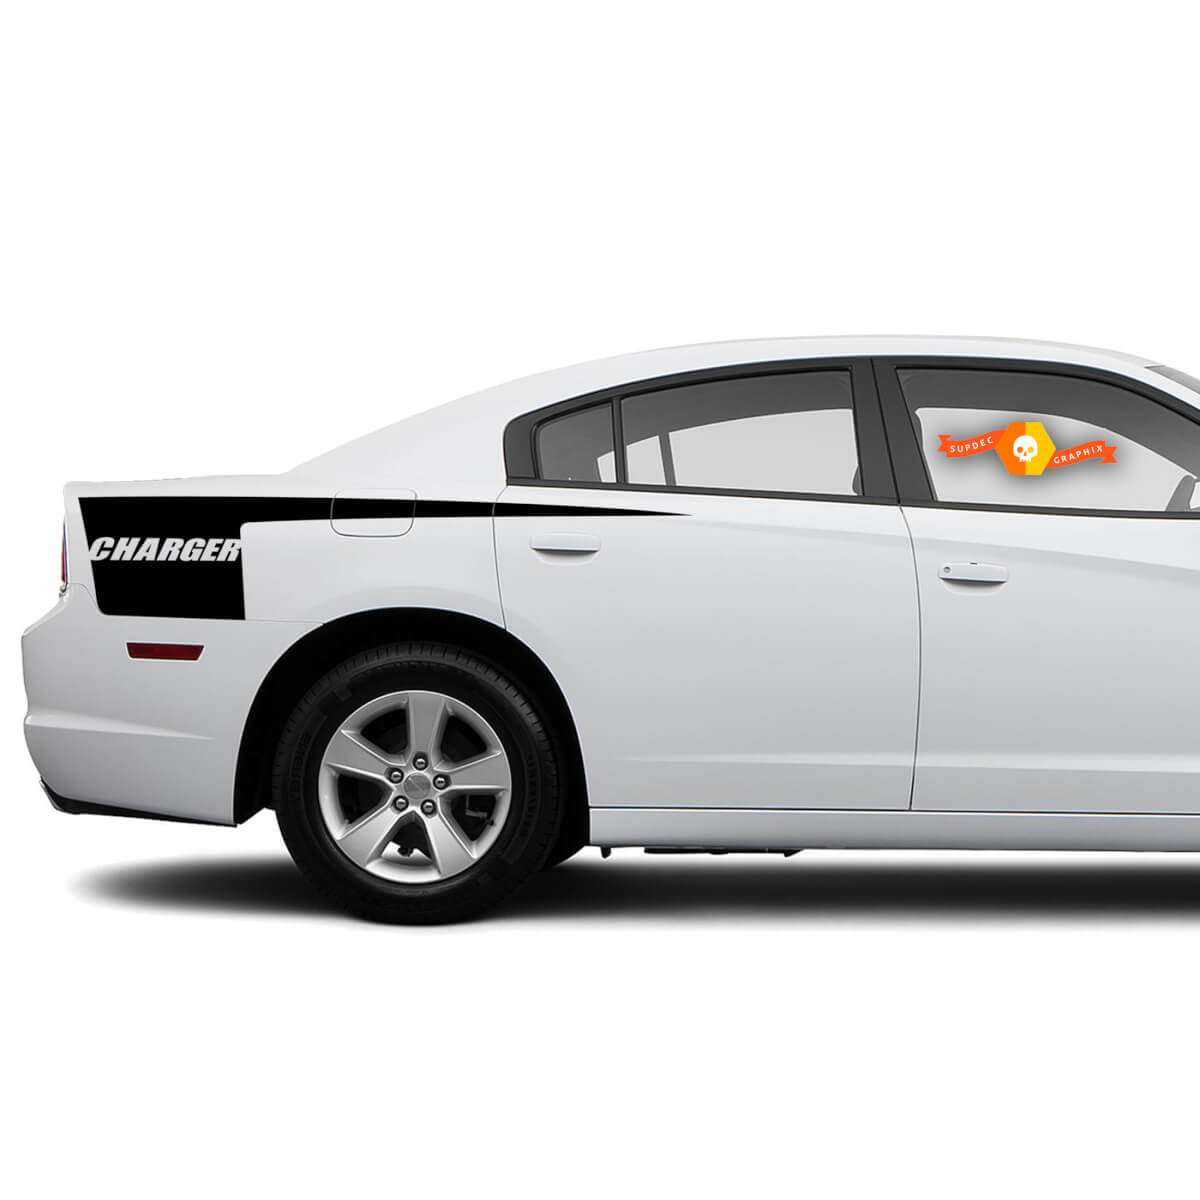 Dodge Charger side Hatchet Stripe Decal Sticker graphics fits to models 2011-2014